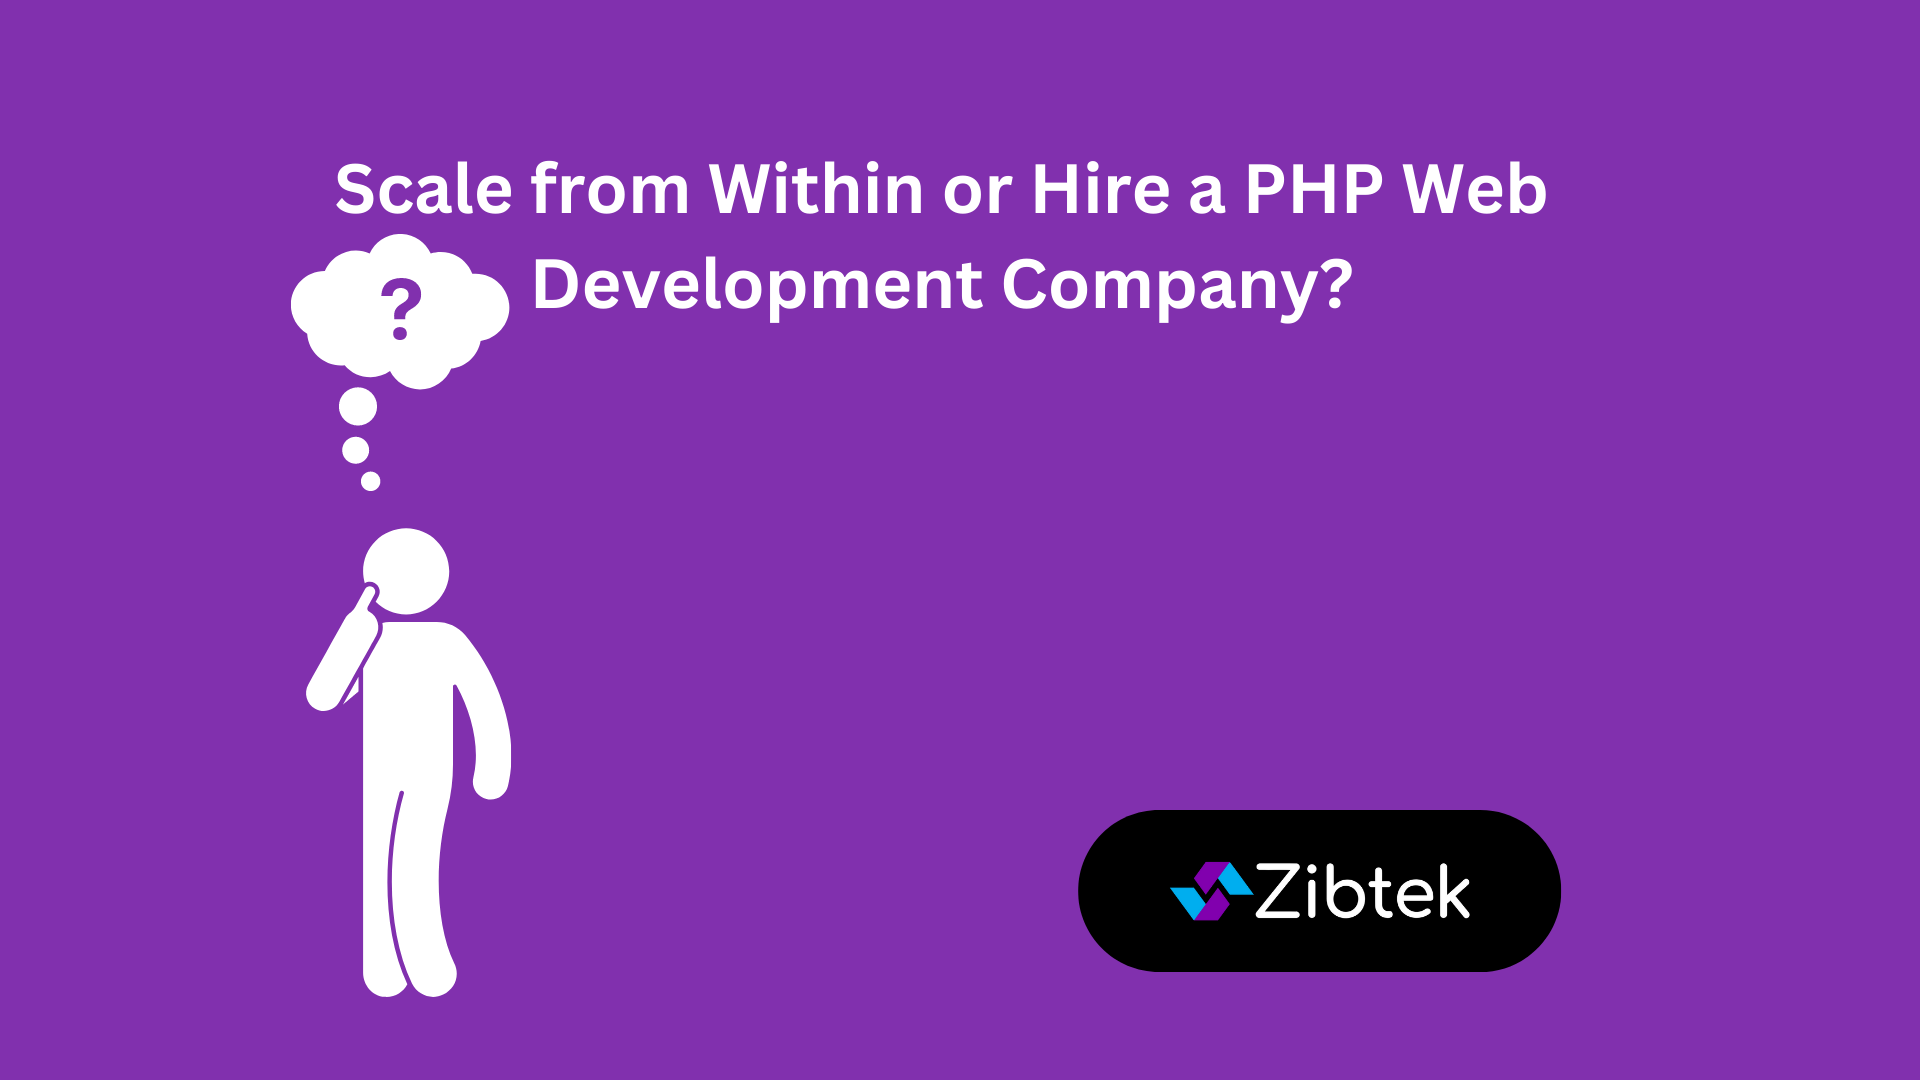 Scale from Within or Hire a PHP Web Development Company?